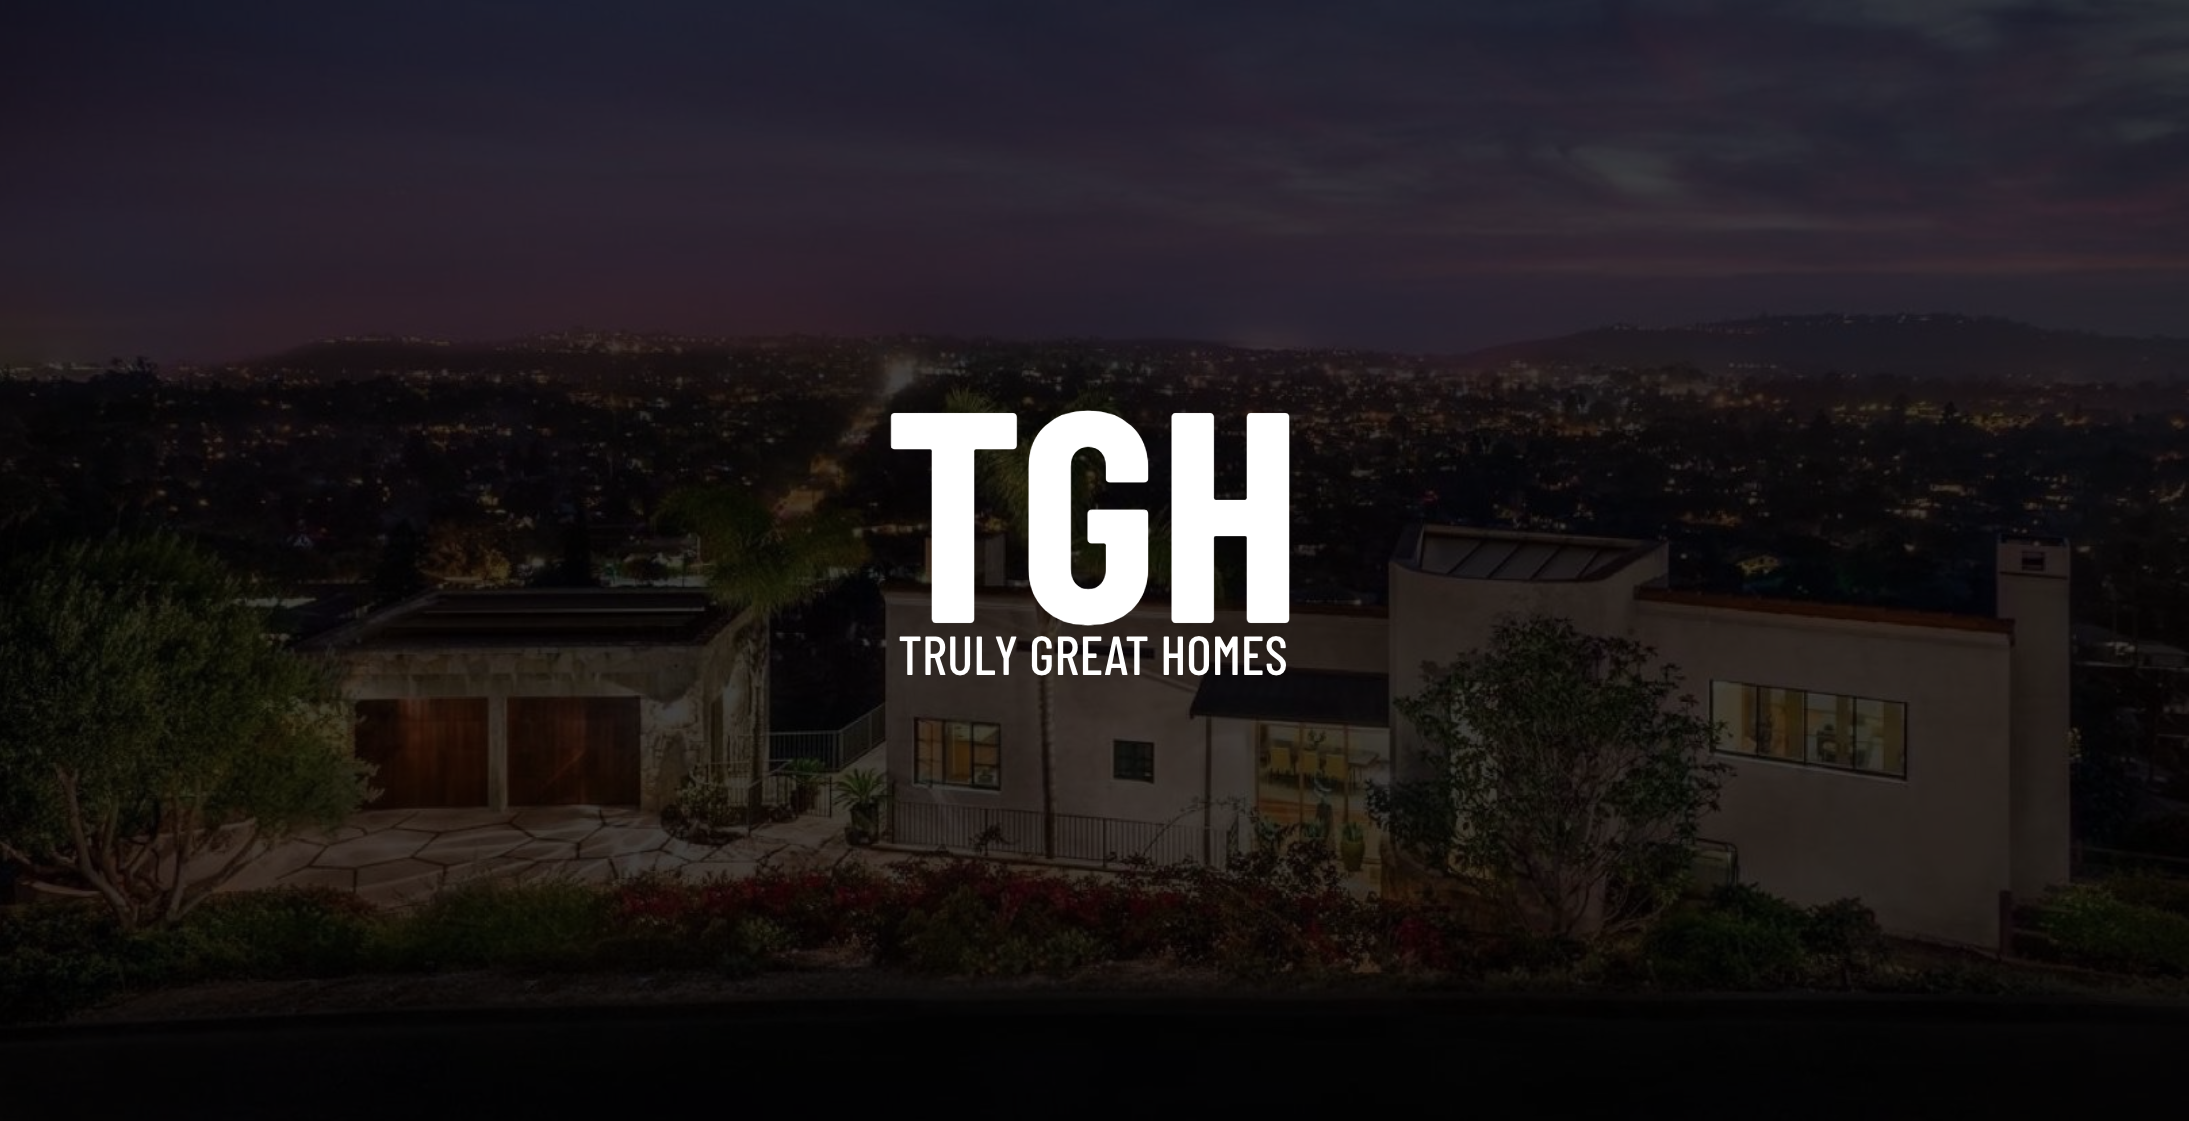 White TGH Truly Great Homes title Santa Barbara California on dimmed background of a large house with two car garage